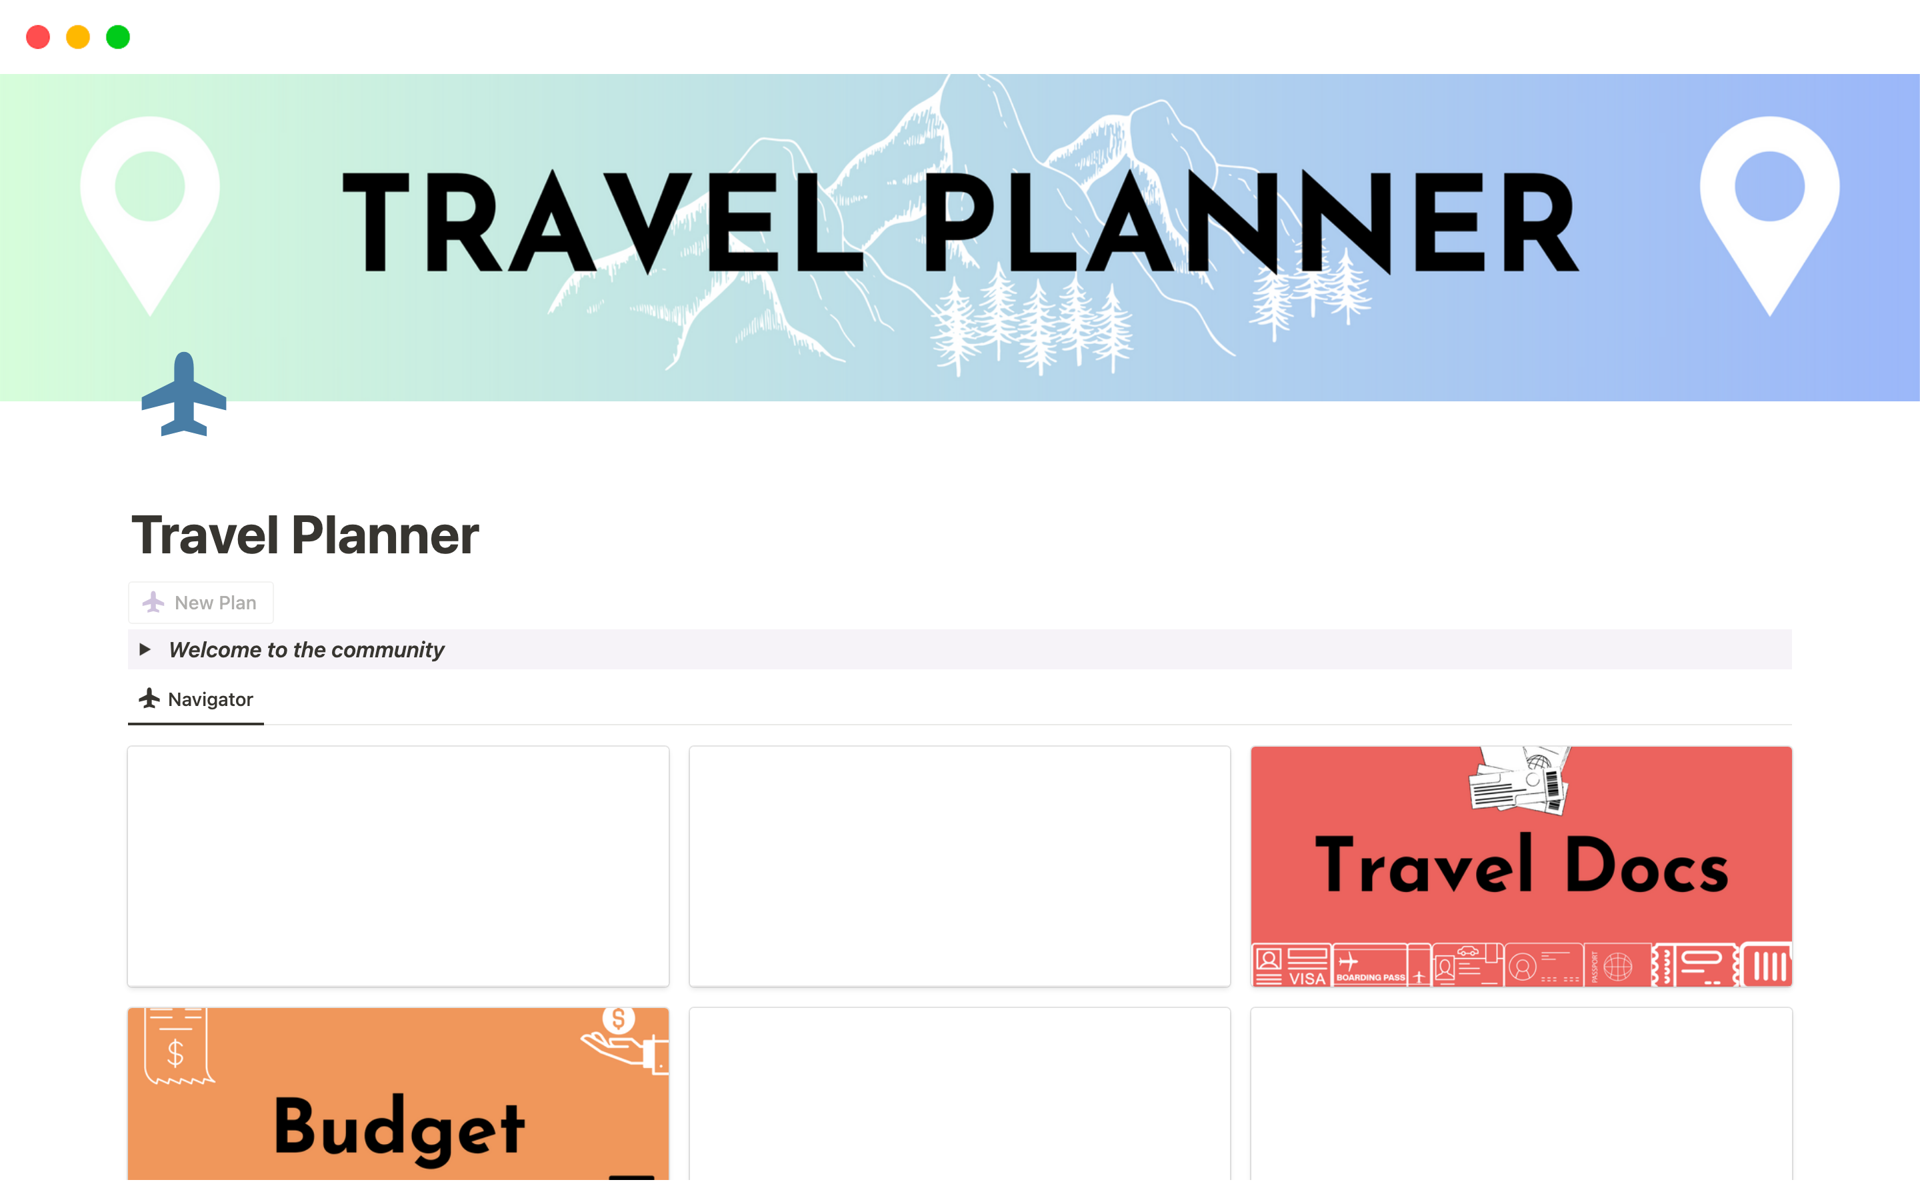 Travel Planner streamlines travel planning by incorporating features like reminders, packing lists, maps integration, document storage, budget creation, and a gallery for displaying images, ensuring a delightful and efficient planning experience.